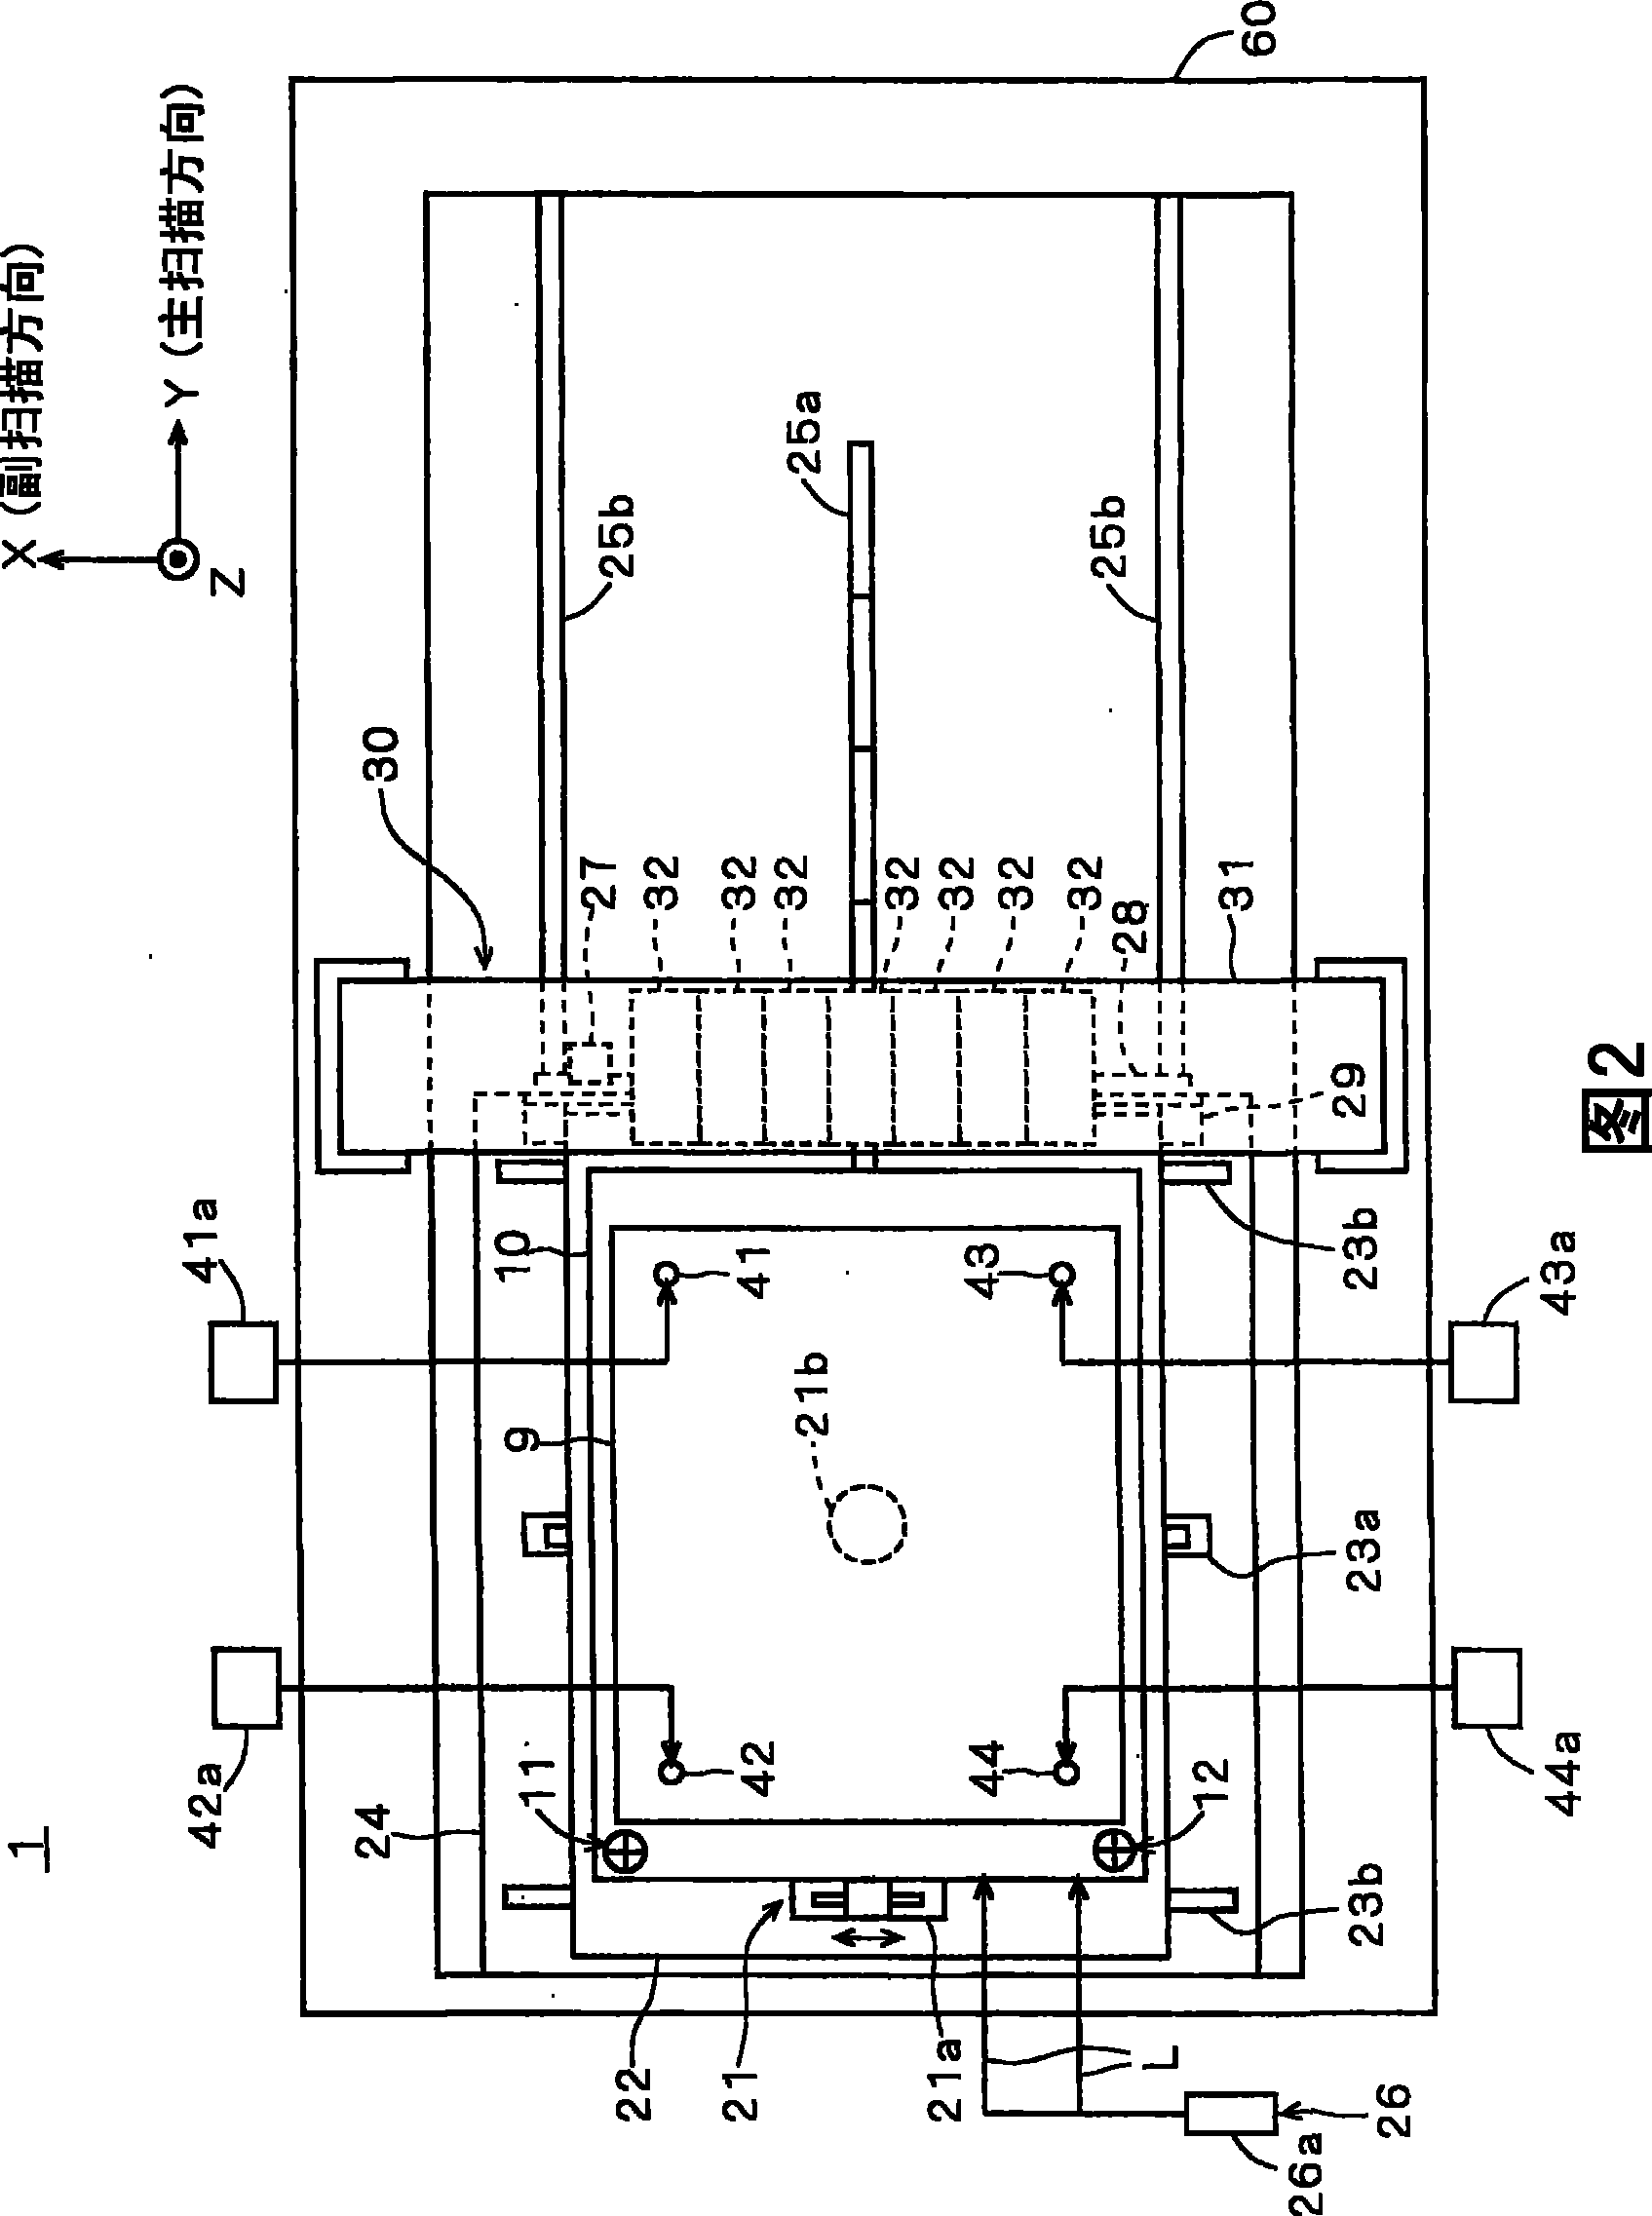 Drawing device and its contraposition method